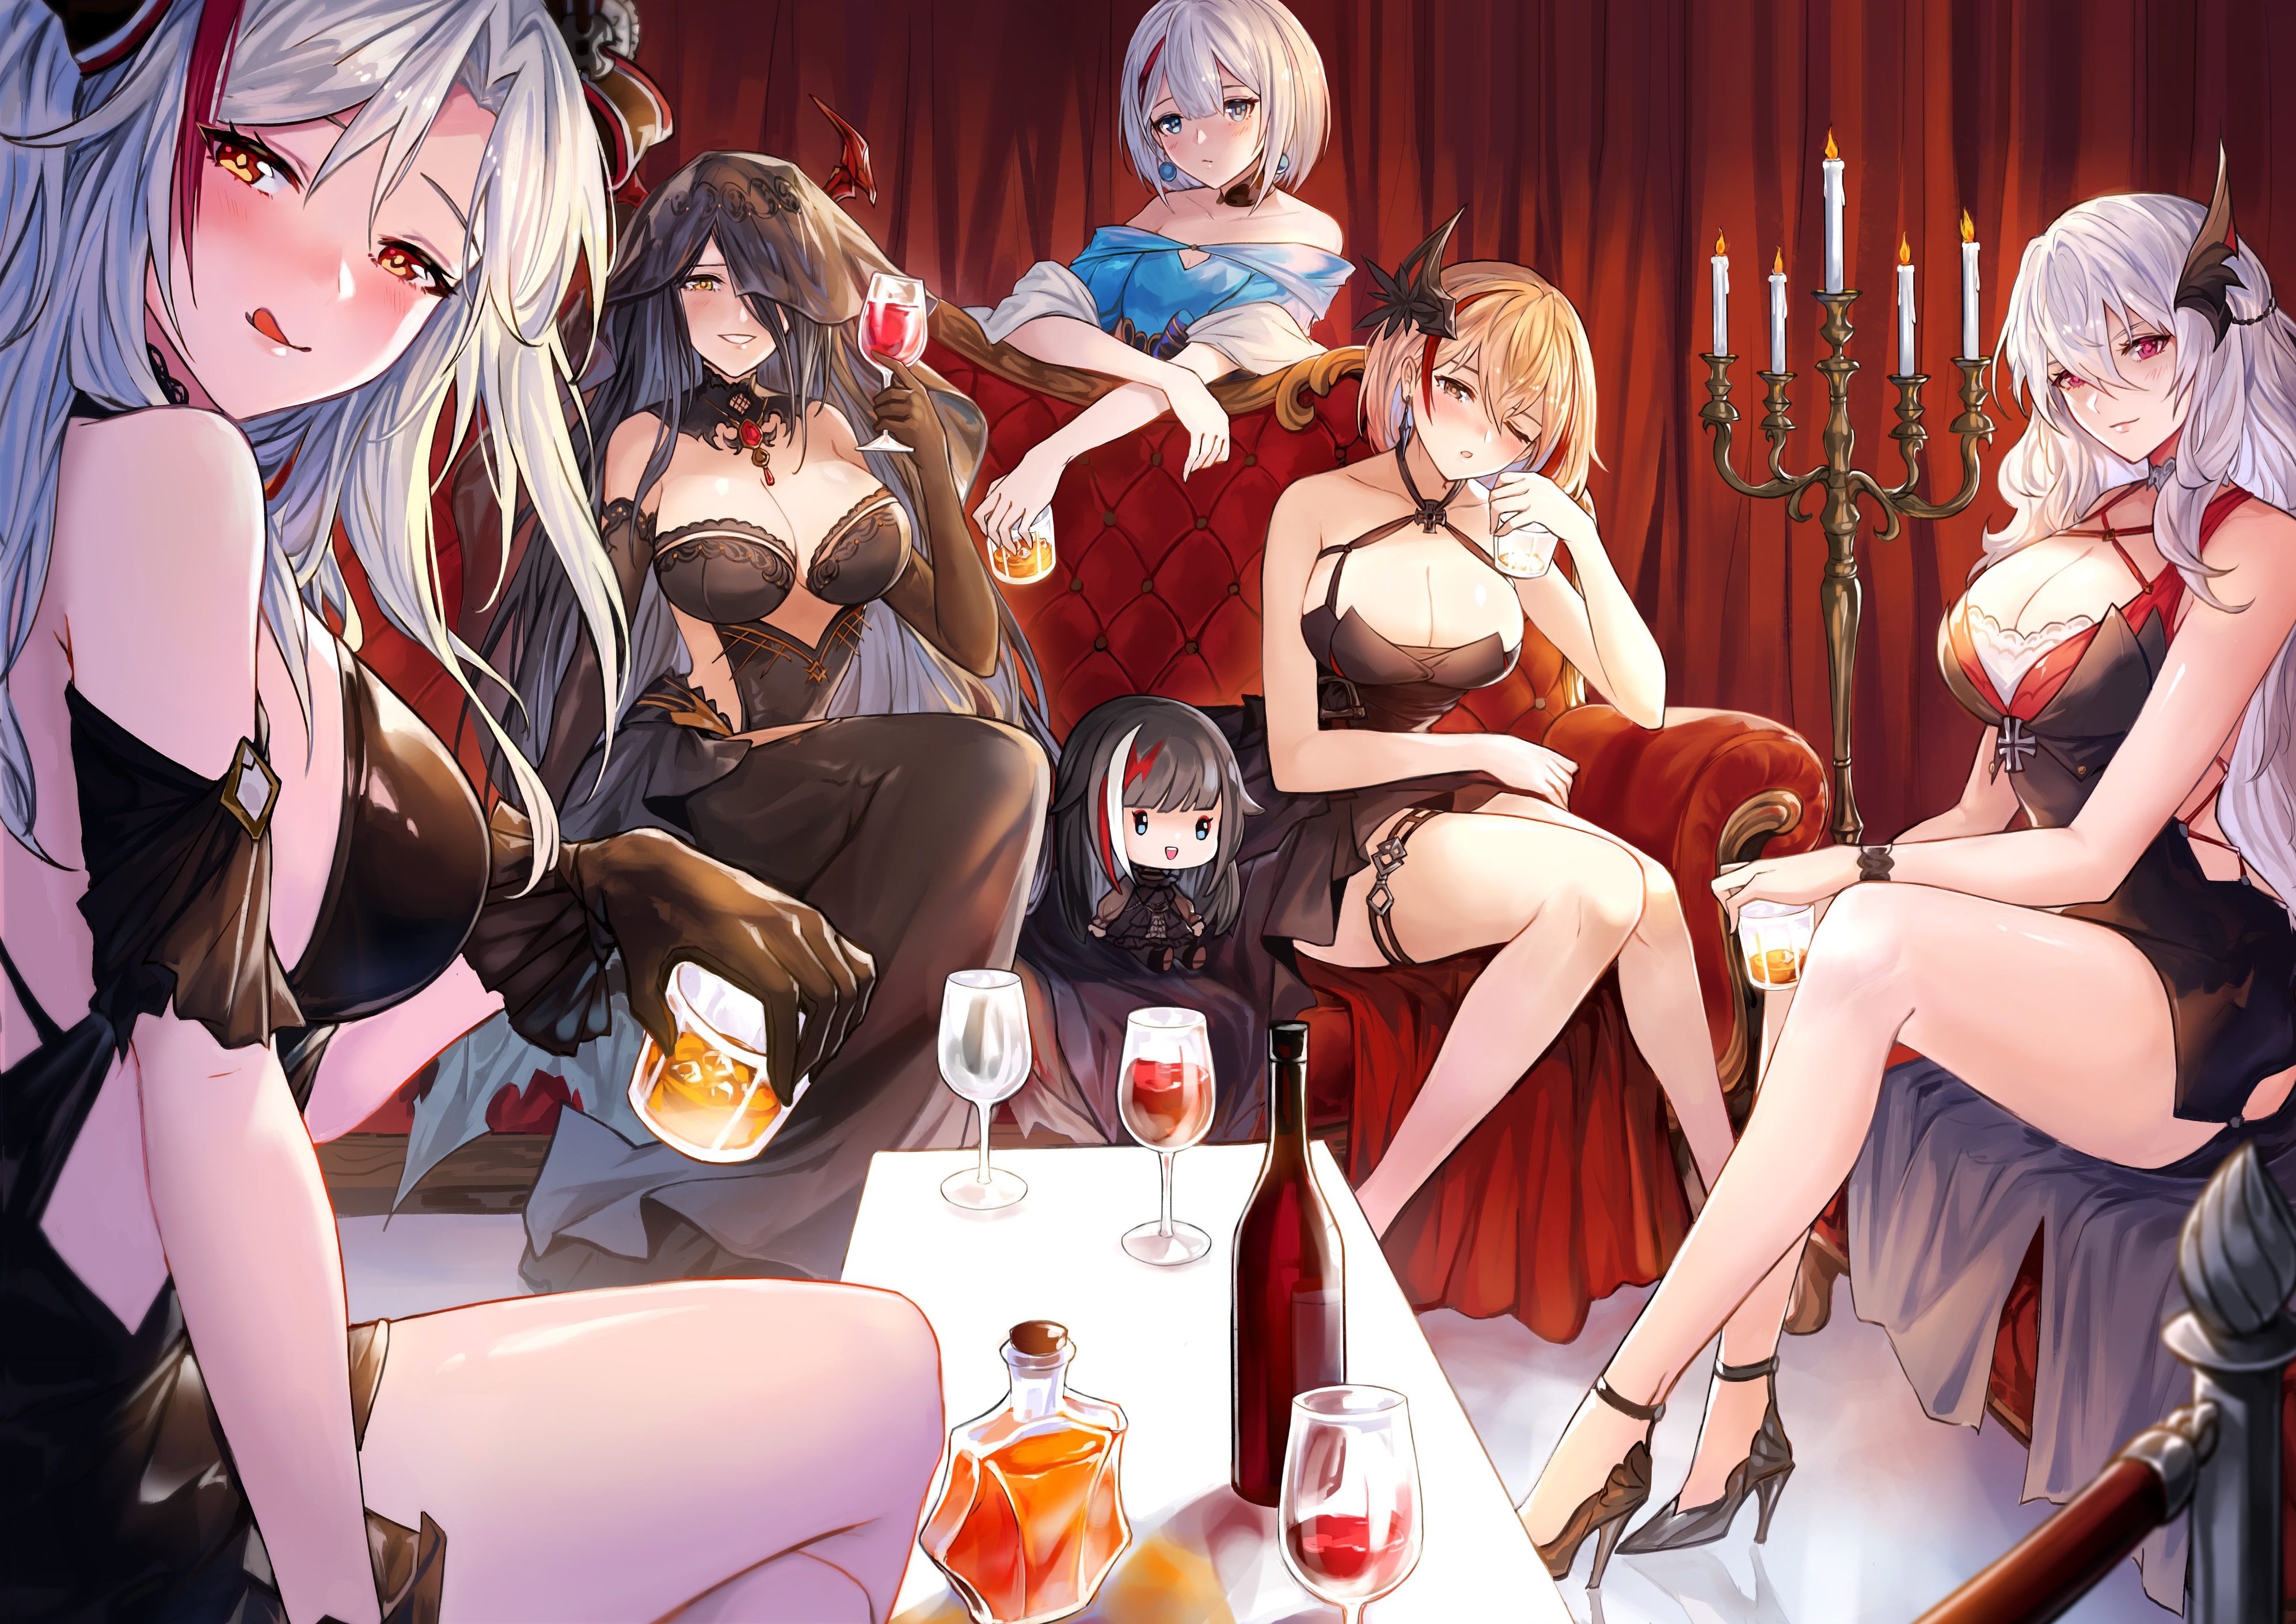 Anime 3988x2820 Azur Lane anime girls Roon (Azur Lane) table Friedrich der Grosse drink looking at viewer blushing heterochromia long hair Prinz Eugen (Azur Lane) dress candles sitting hair over one eye smiling gloves heels cleavage big boobs alcohol elbow gloves earring reflection one eye closed tongue out